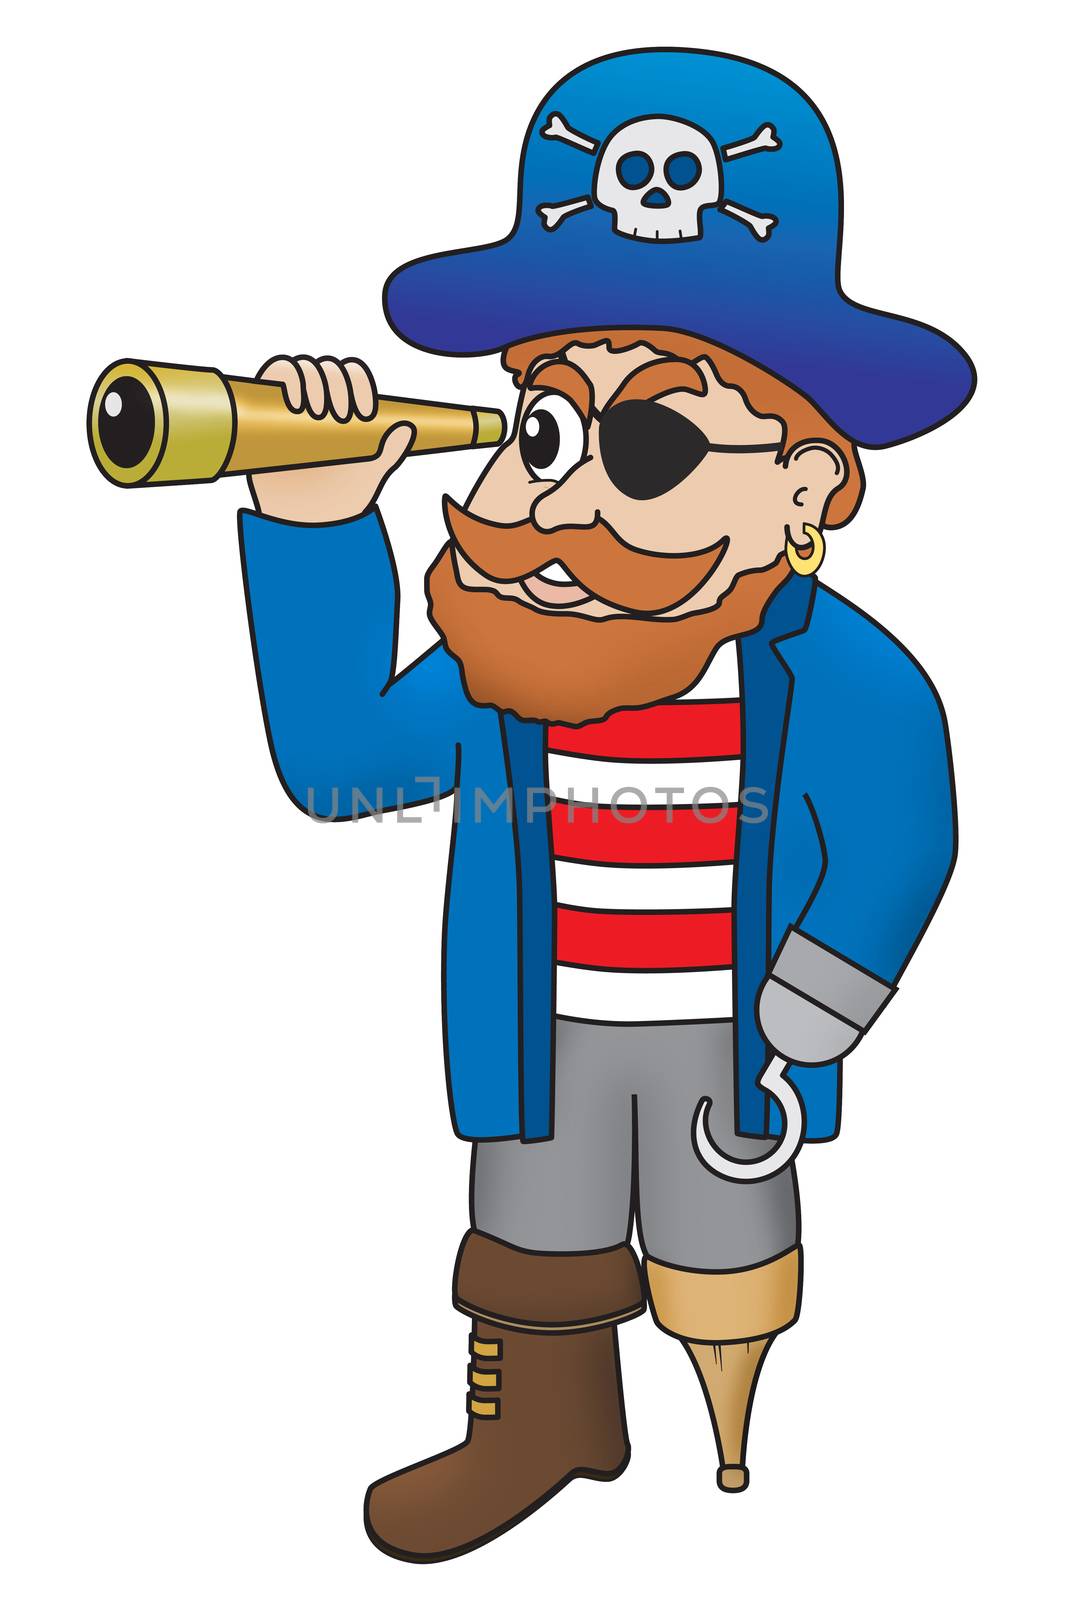 Cartoon illustration of a comical pirate looking through a spyglass